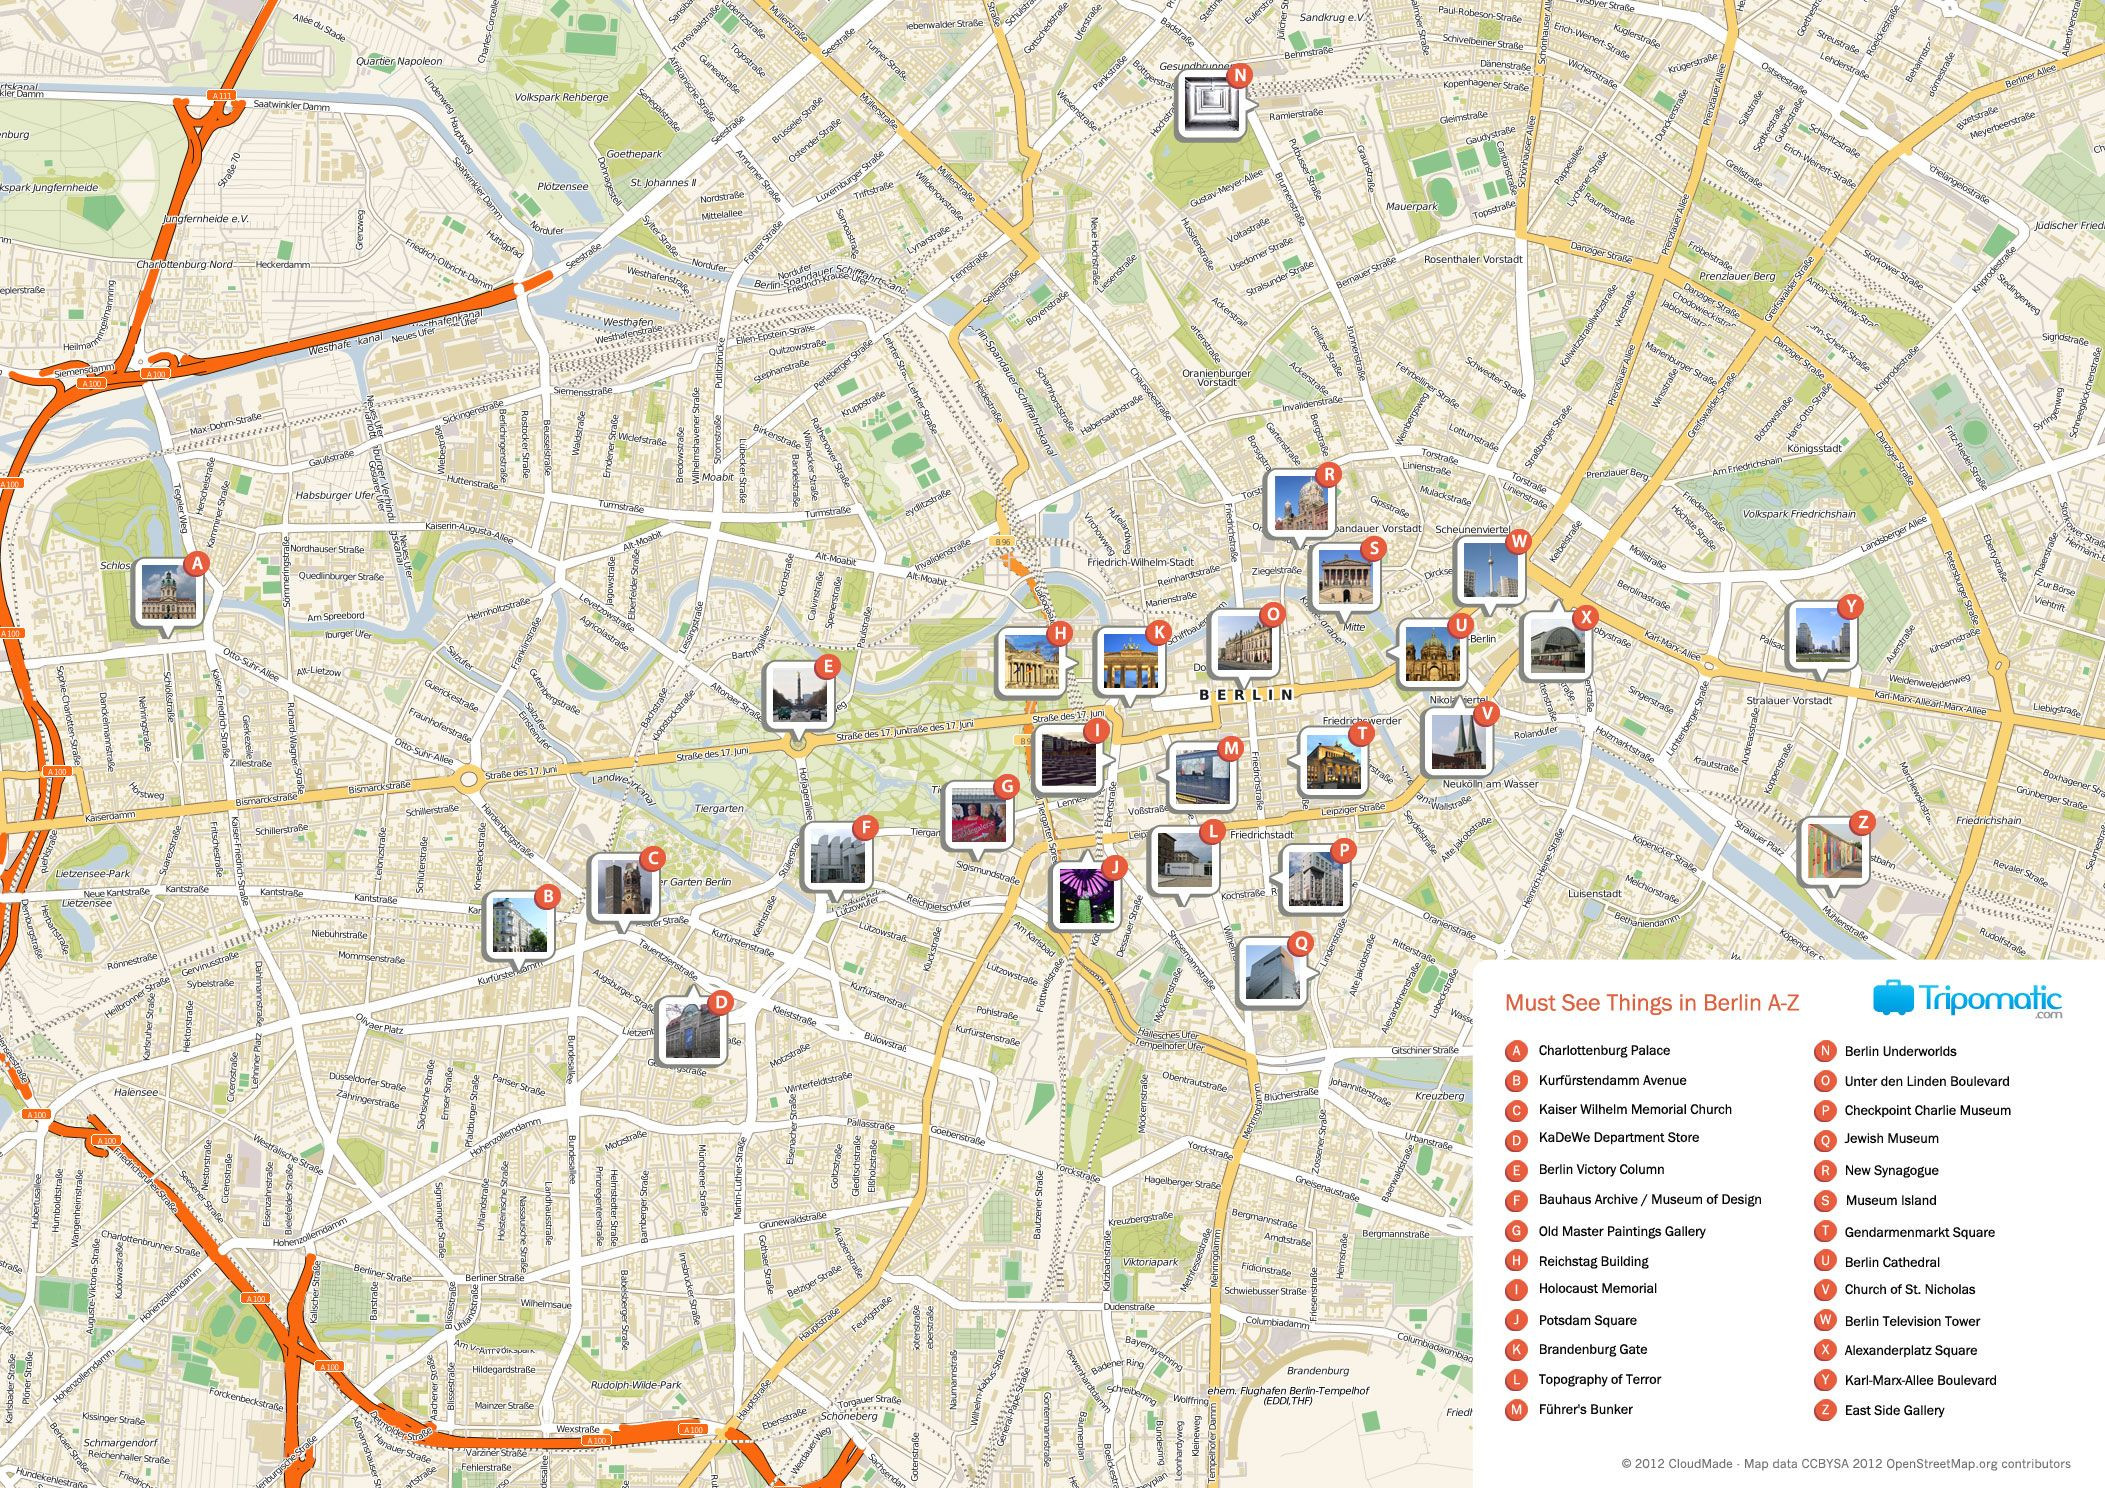 Printable Map Budapest Luxury Map Of Berlin Tourist Sights And Attractions From Tripomatic